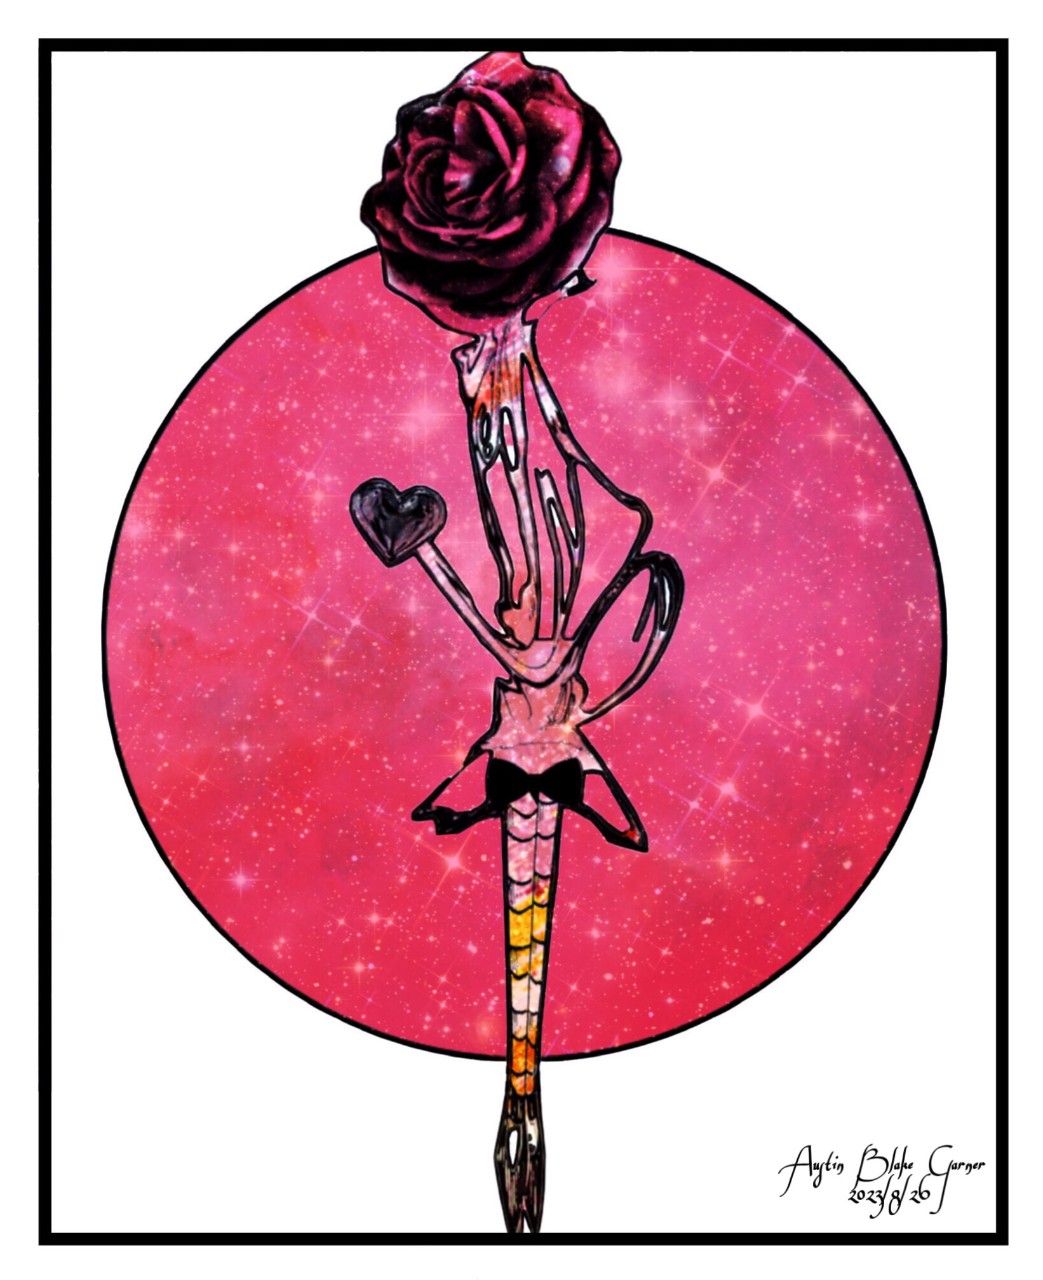 A white background with a black line border contains a black-outlined image of a dark pink rose. The stem of the rose transitions into the appearance of a body. One extension from the stem resembles an arm holding out a heart. The stem/slender body is wearing what looks like a short skirt with a black bow, and the bottom of the stem resembles two long legs on tiptoe, with striped stockings and black, pointed shoes. The rose figure is positioned in front of a large, black-outlined circle filled with sparkling white stars on misty, bright pink background.